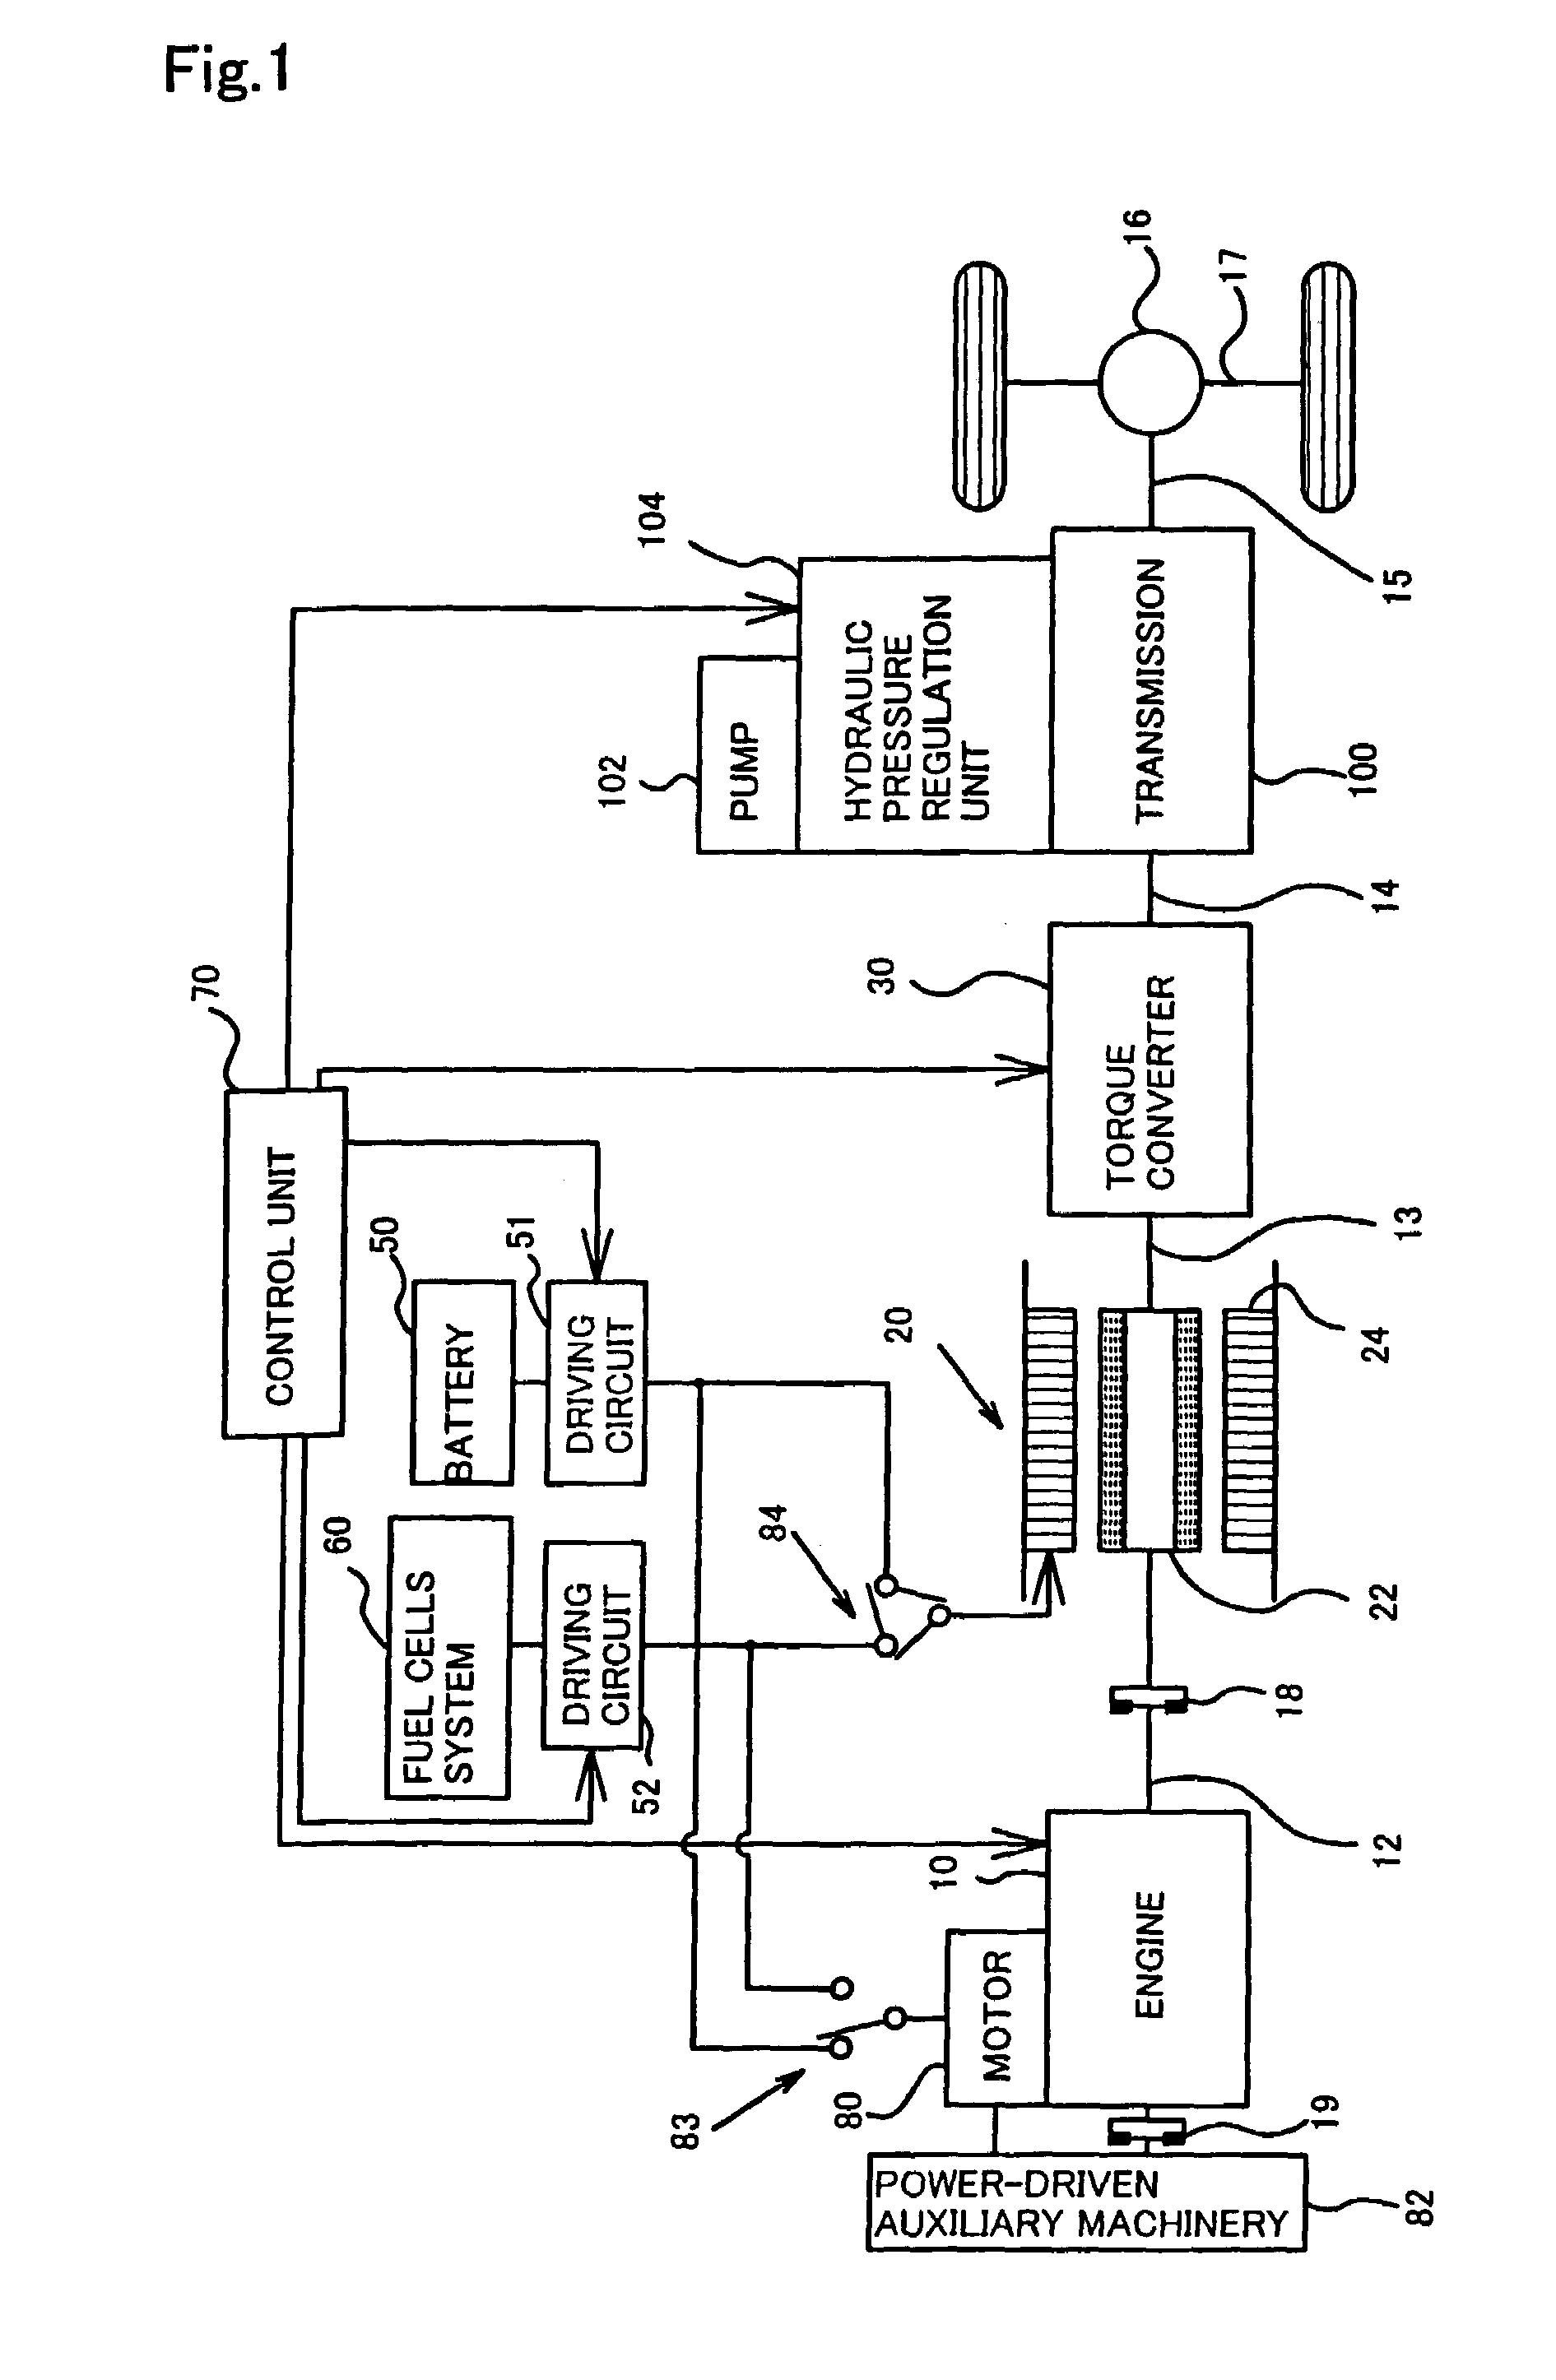 Moving object with fuel cells incorporated therein and method of controlling the same